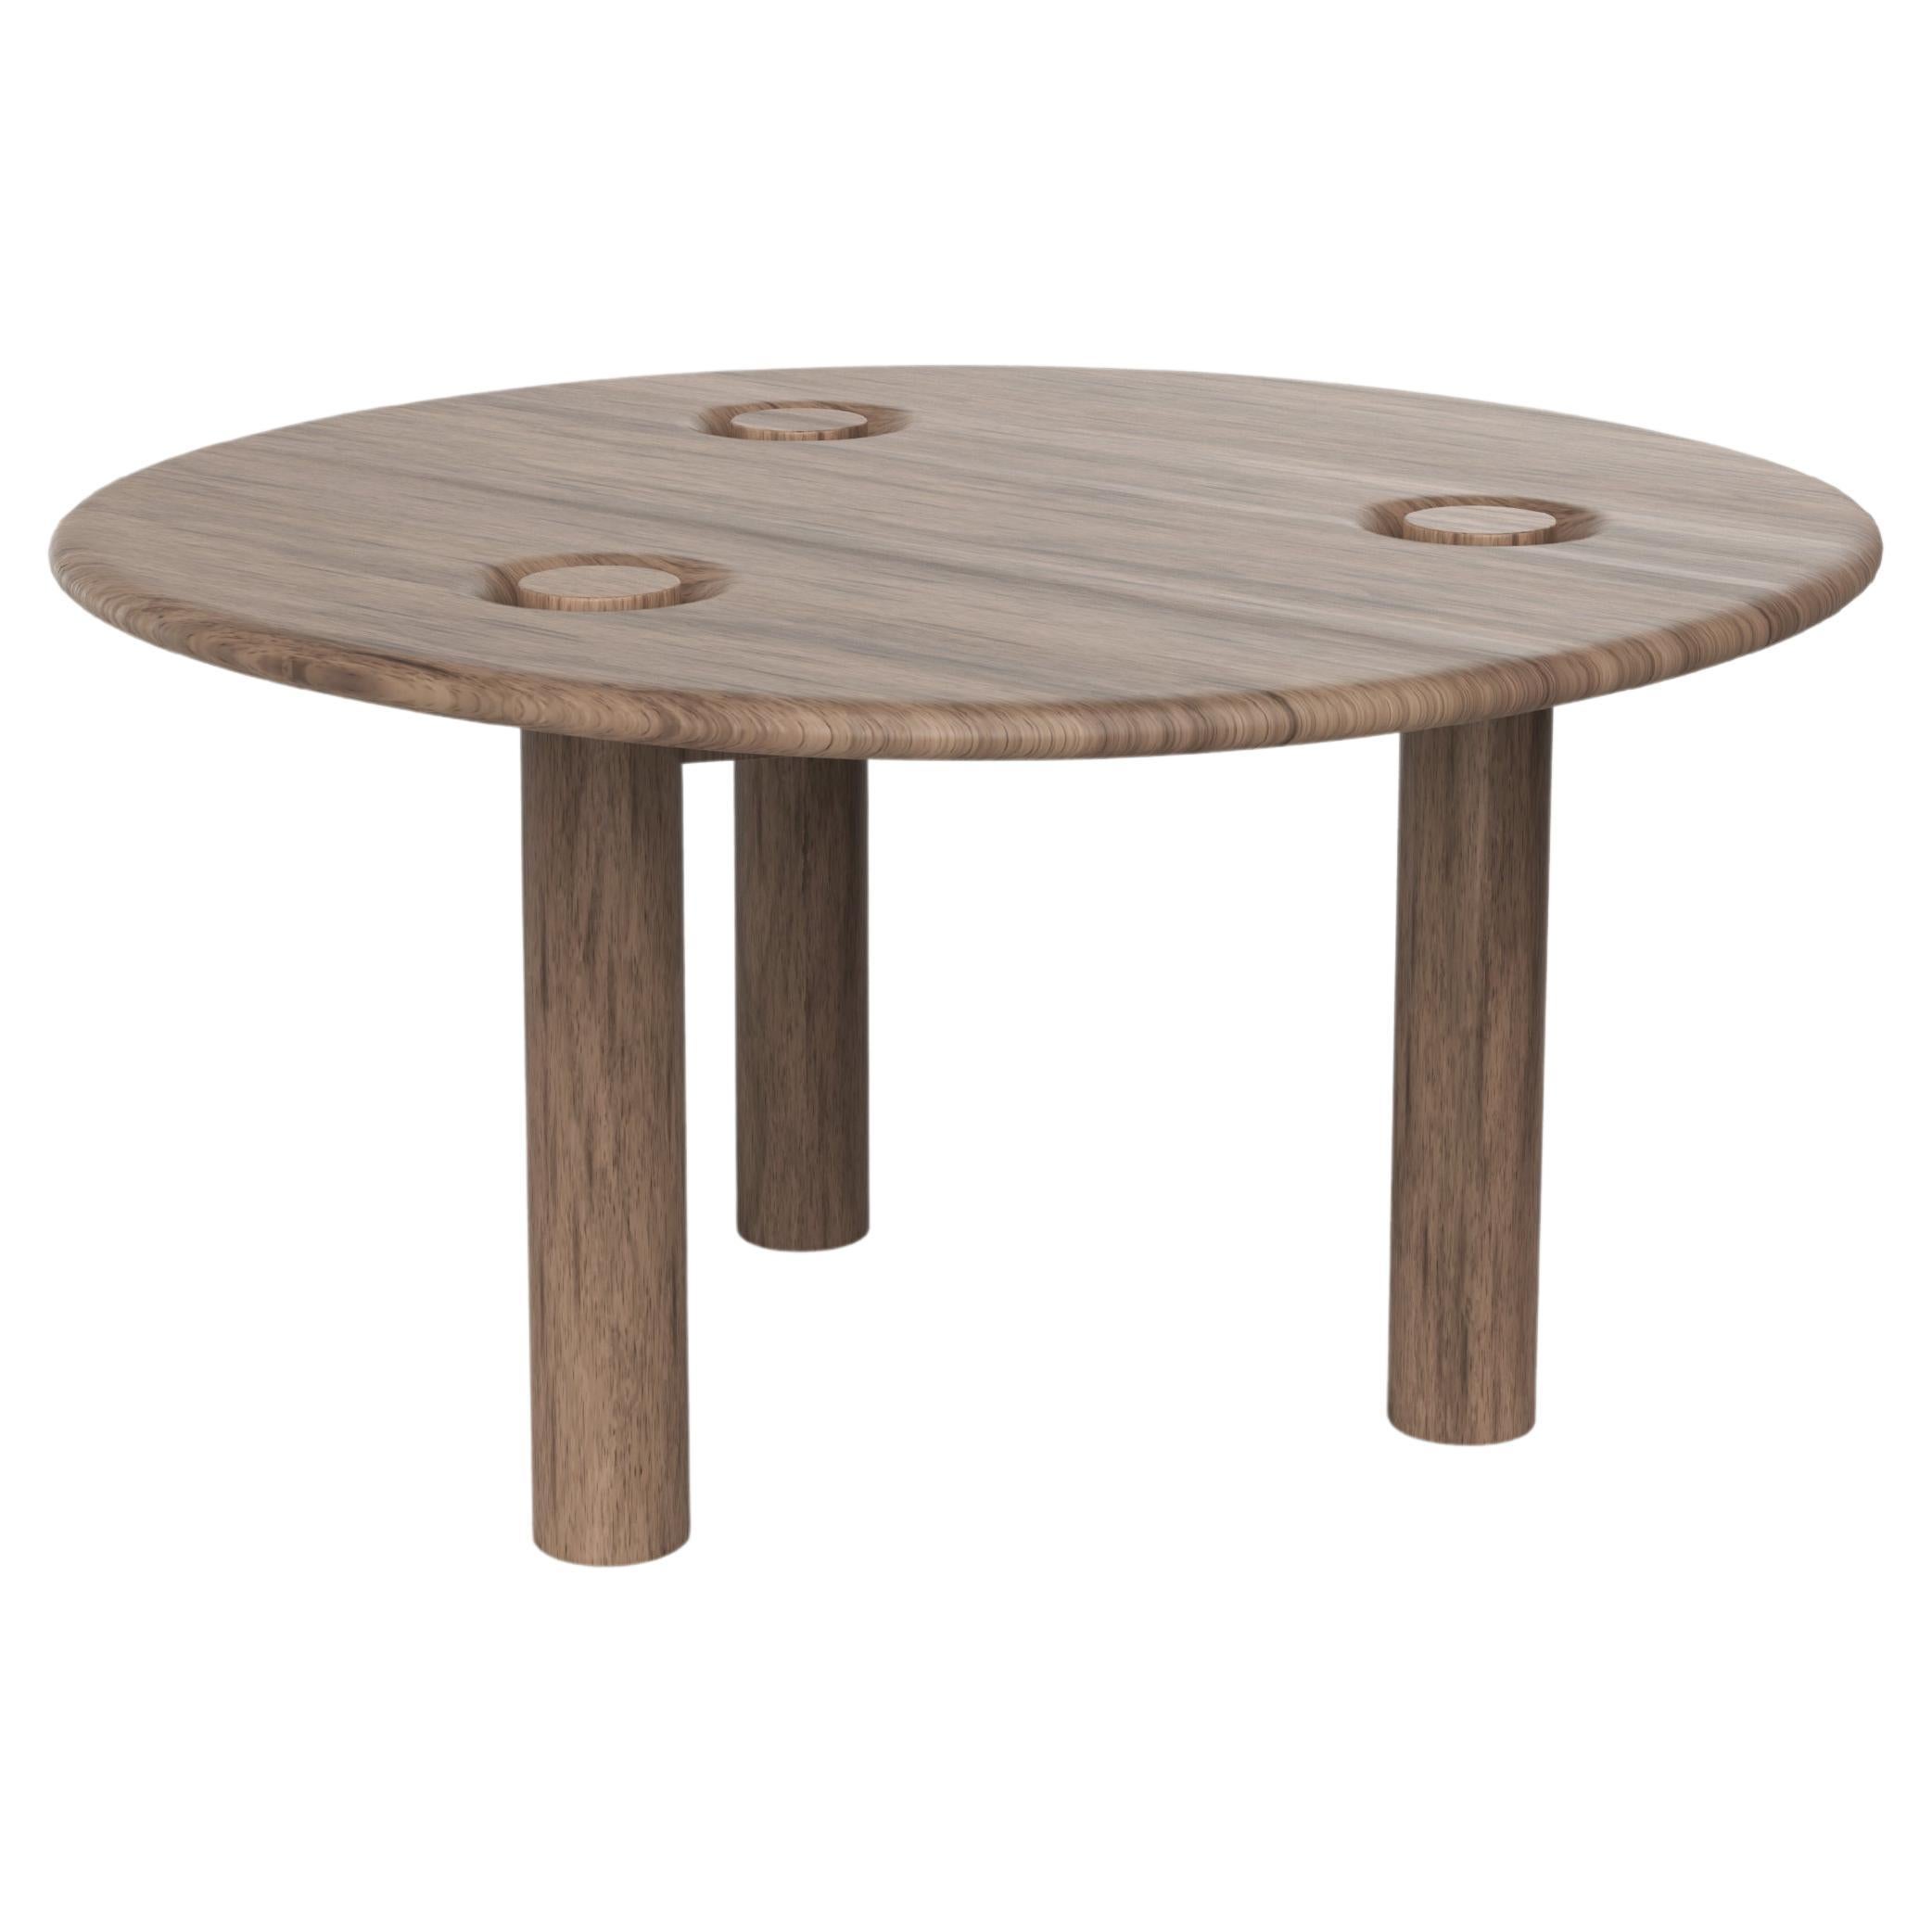 Contemporary Limited Edition Signed Wood Table, Asido V3 by Edizione Limitata